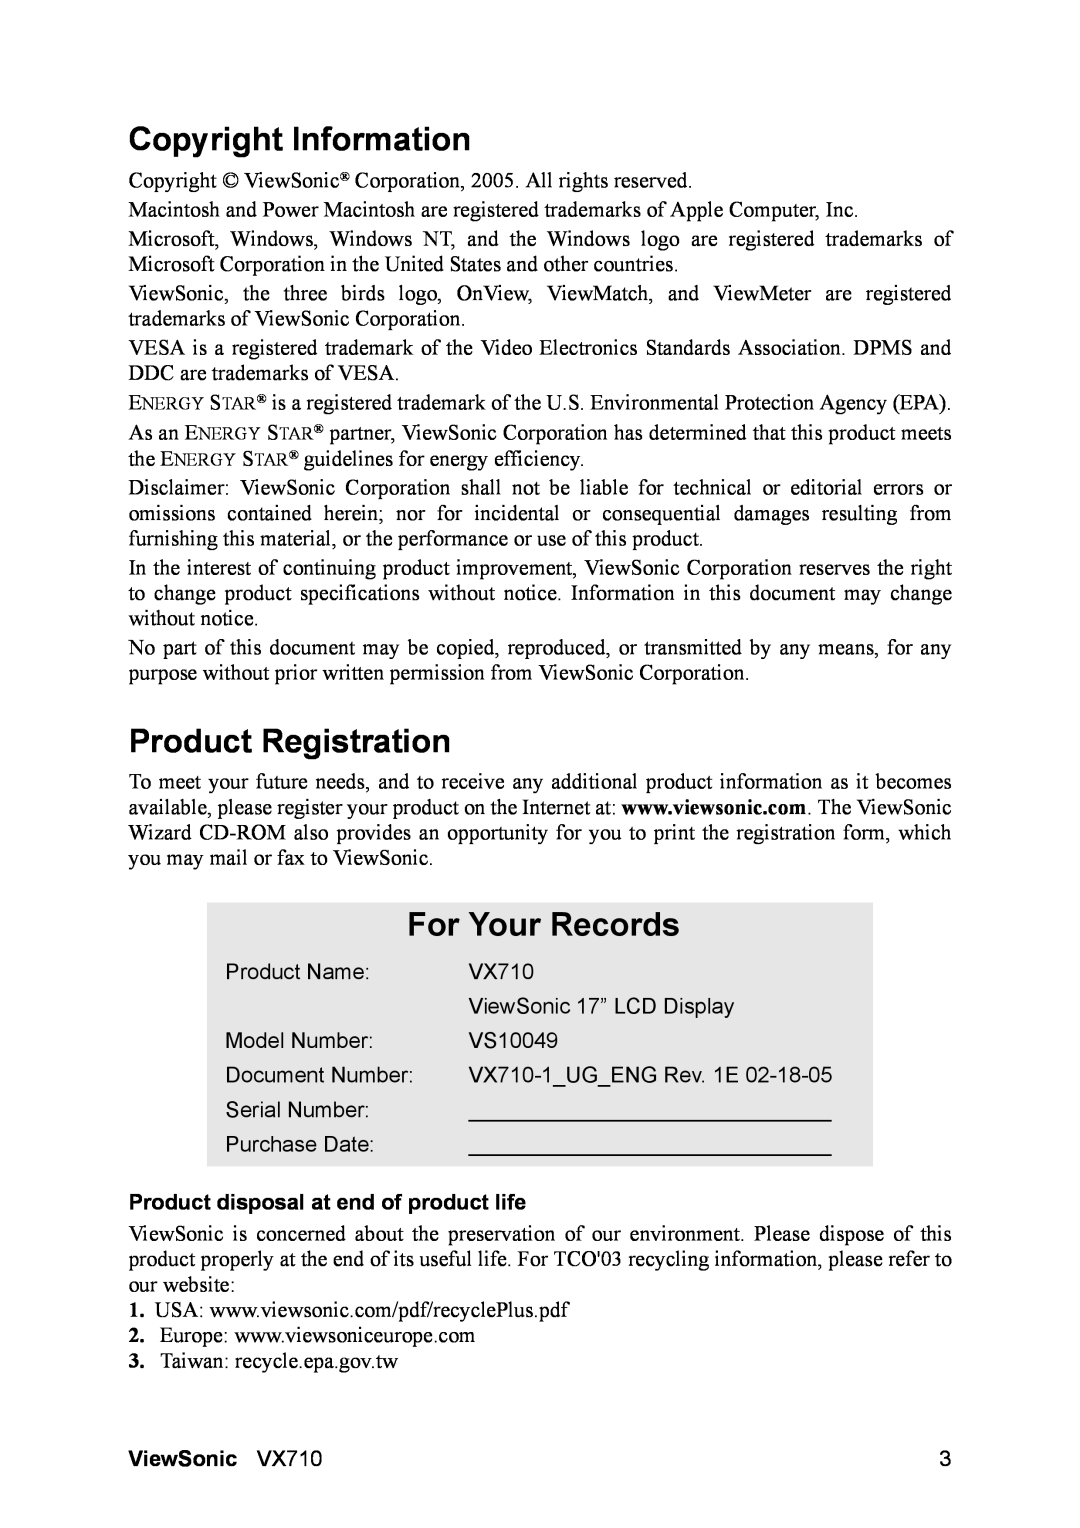 ViewSonic VX710 Copyright Information, Product Registration, For Your Records, Product disposal at end of product life 